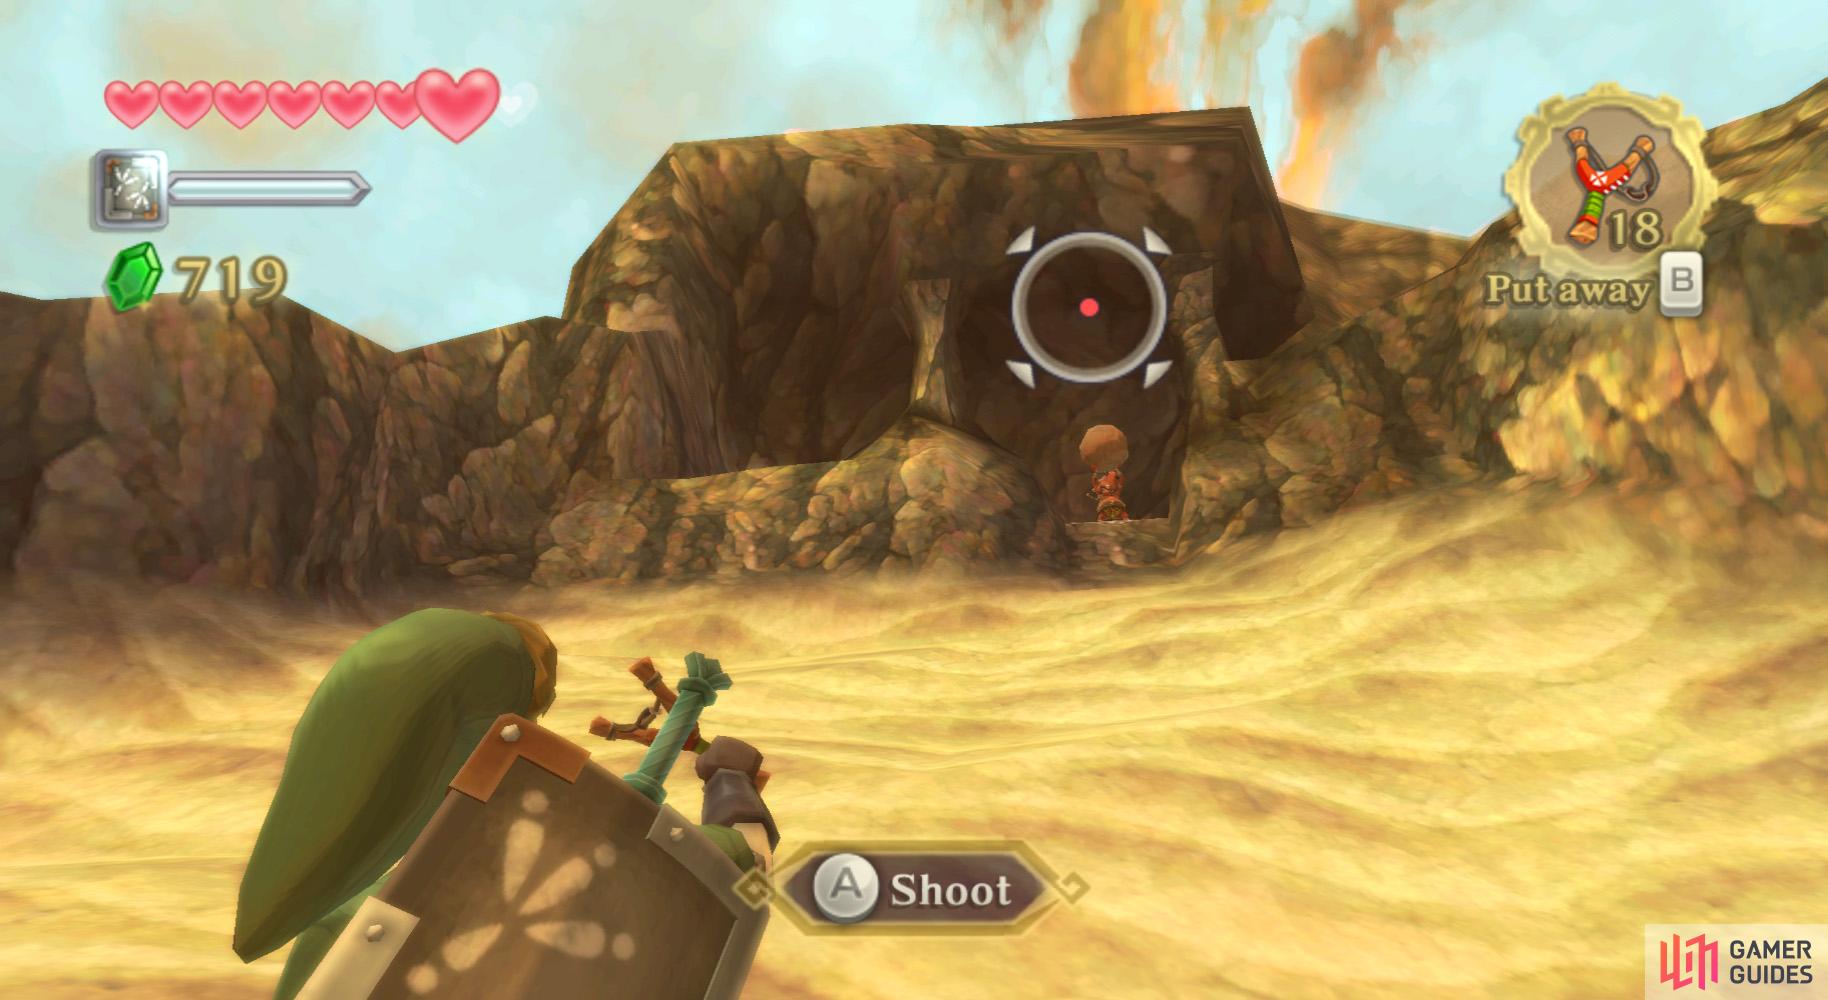 Shoot the Bokoblin to make them drop their boulder.